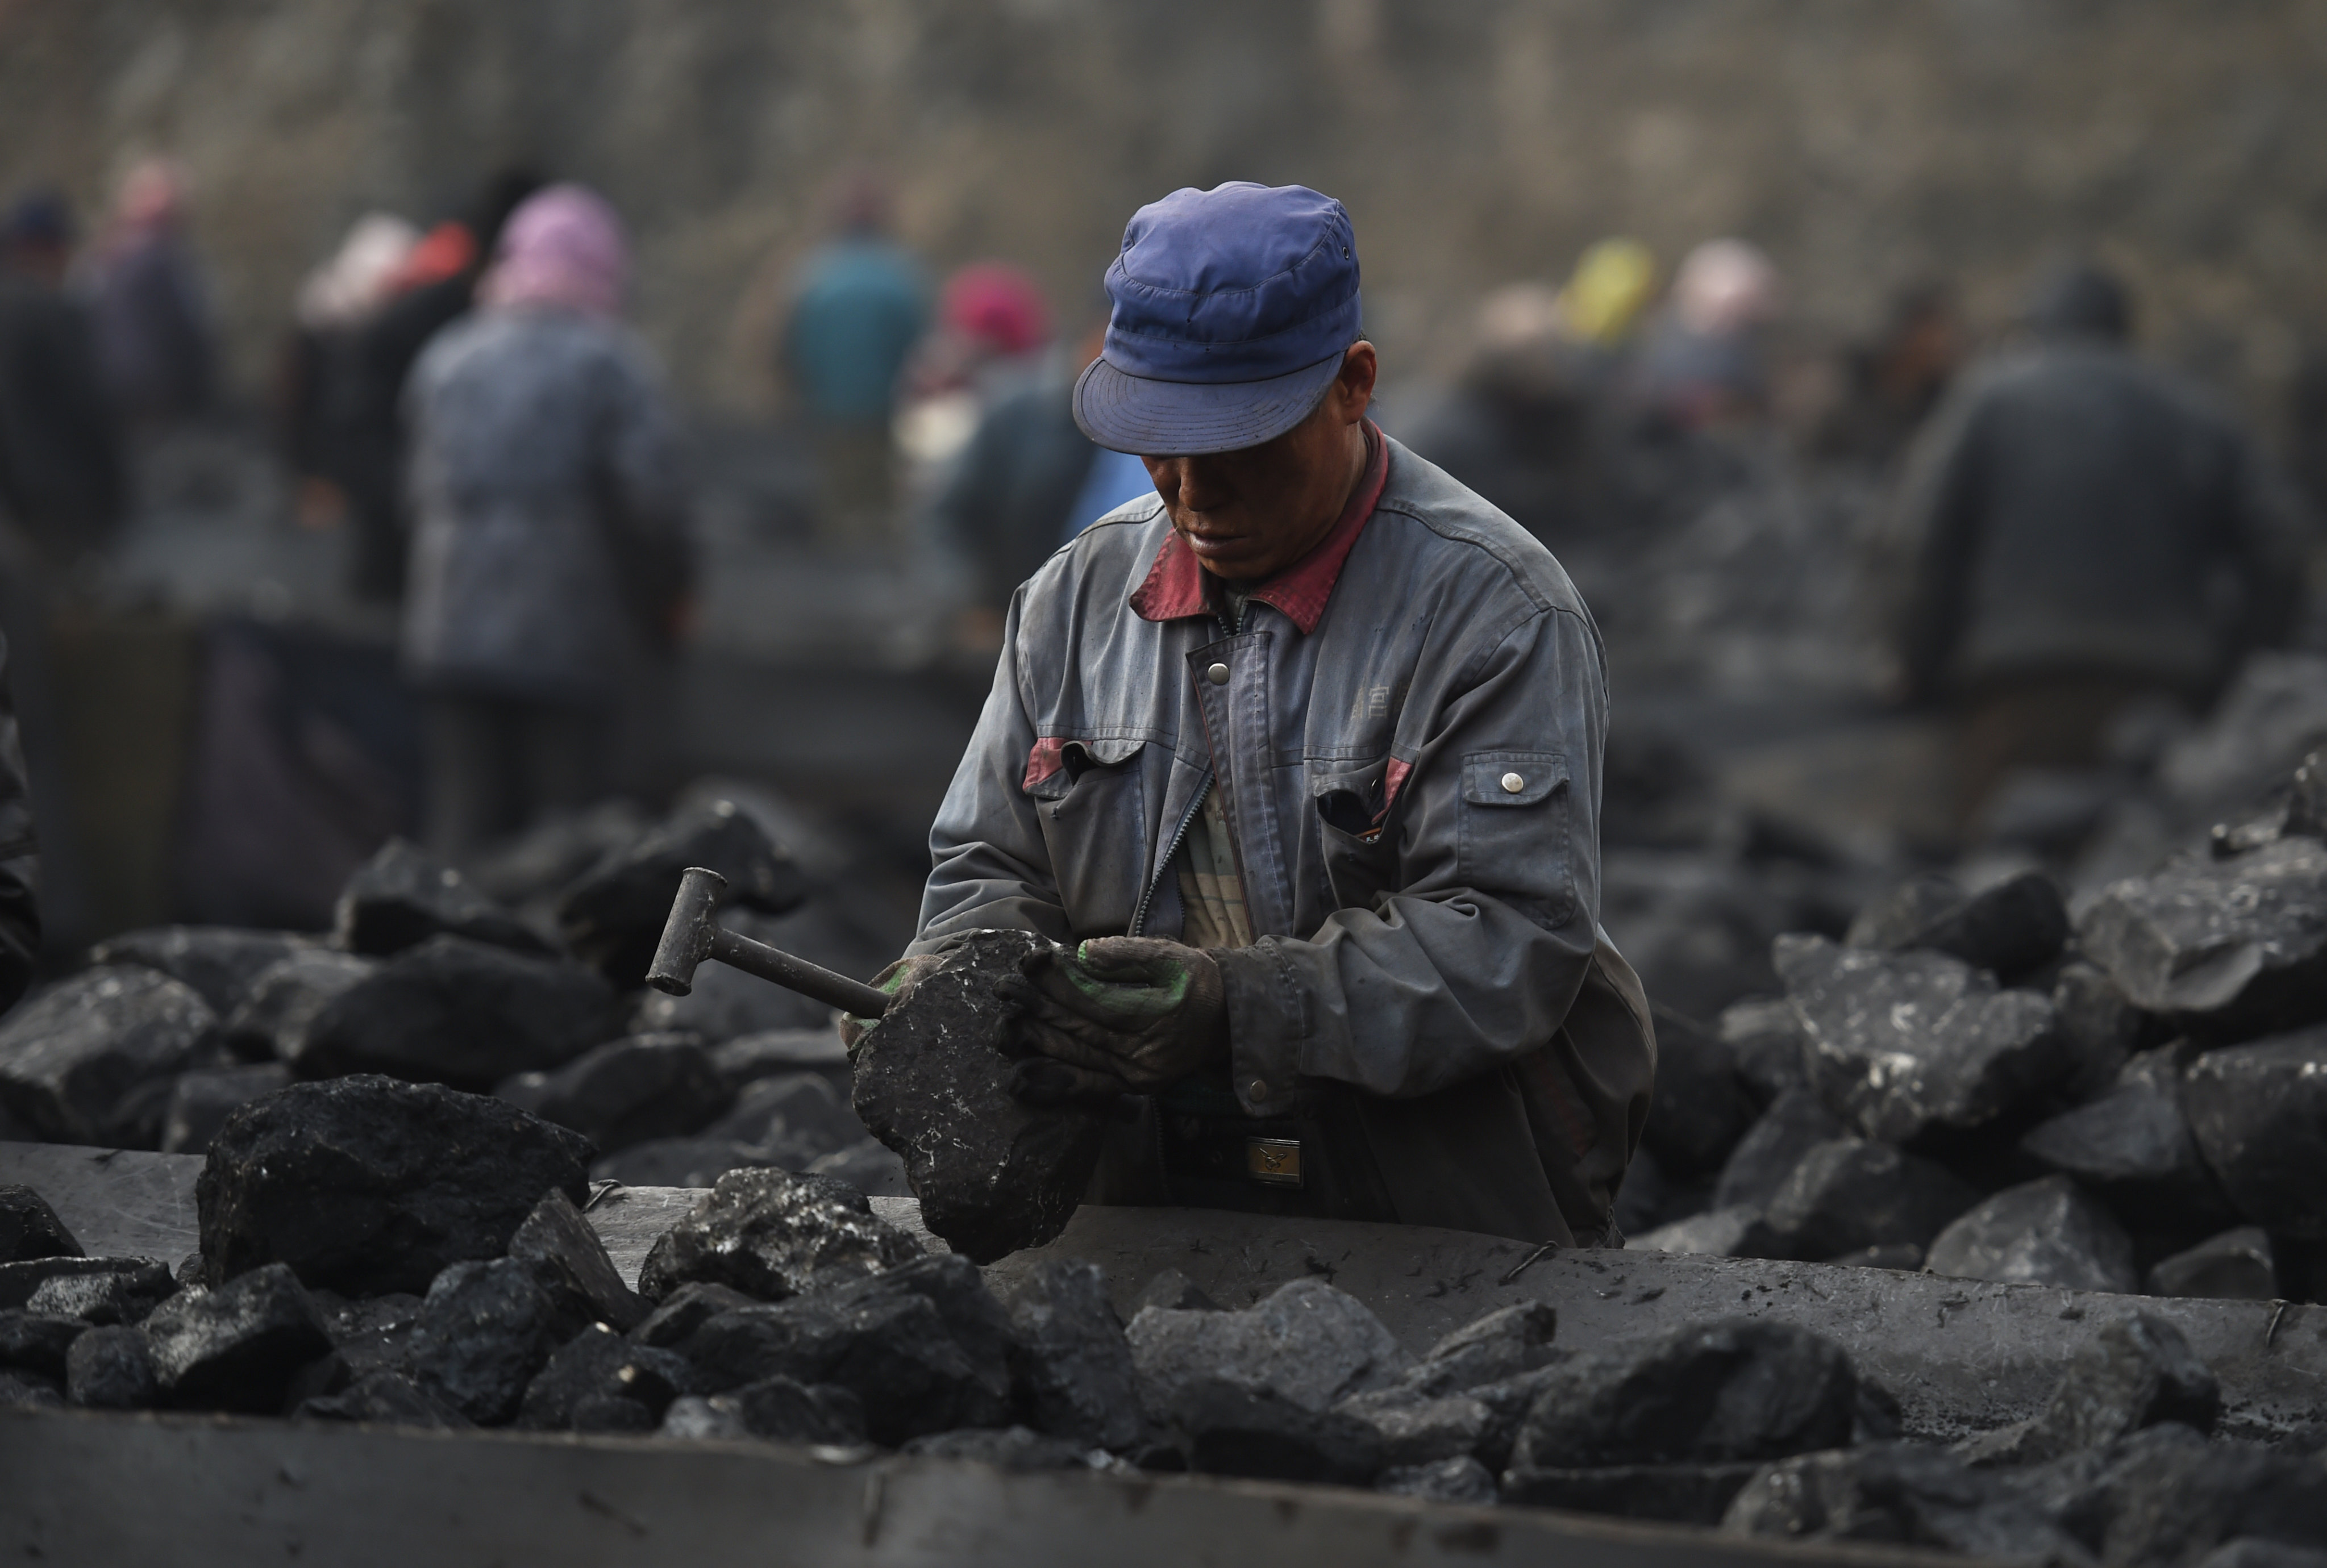 A worker sorting coal on a conveyer belt, near a coal mine at Datong, in northern China’s Shanxi province on November 25, 2015. Photo: AFP